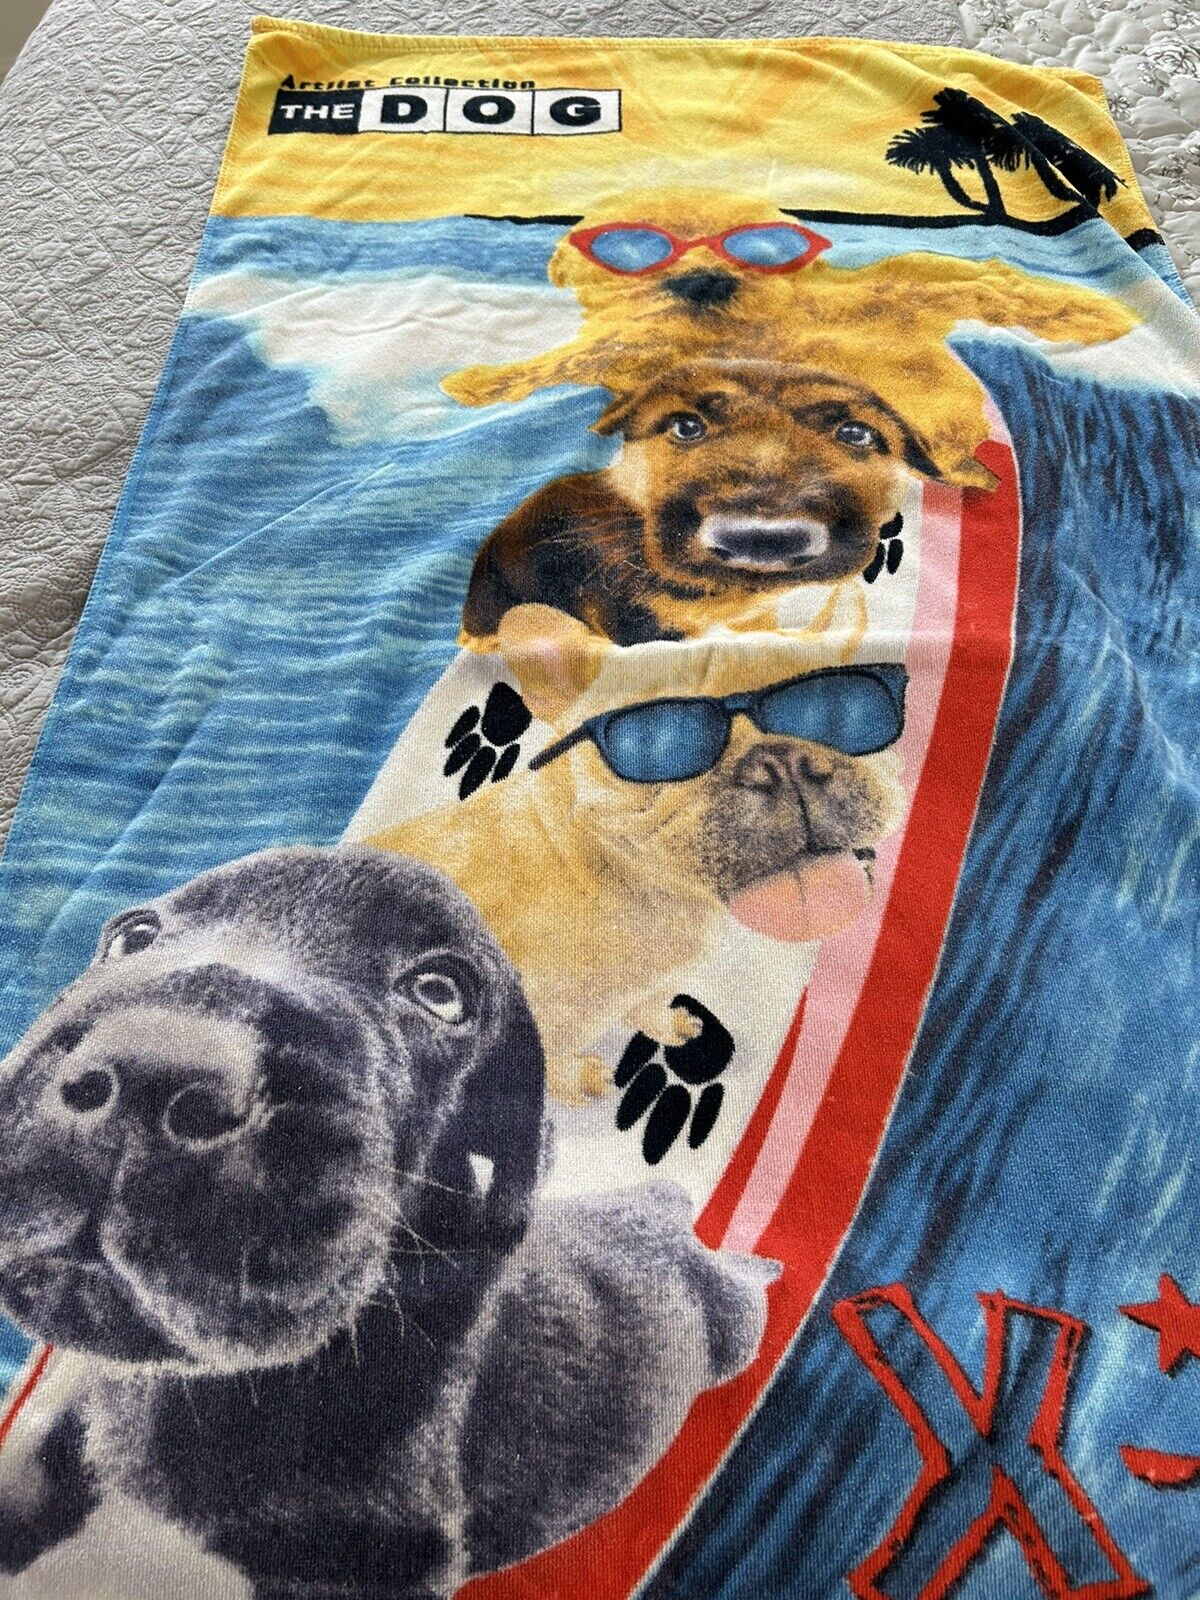 Vintage THE DOG Artlist Collection Beach Towel “X-Treme Surf Pups” On Surfboard